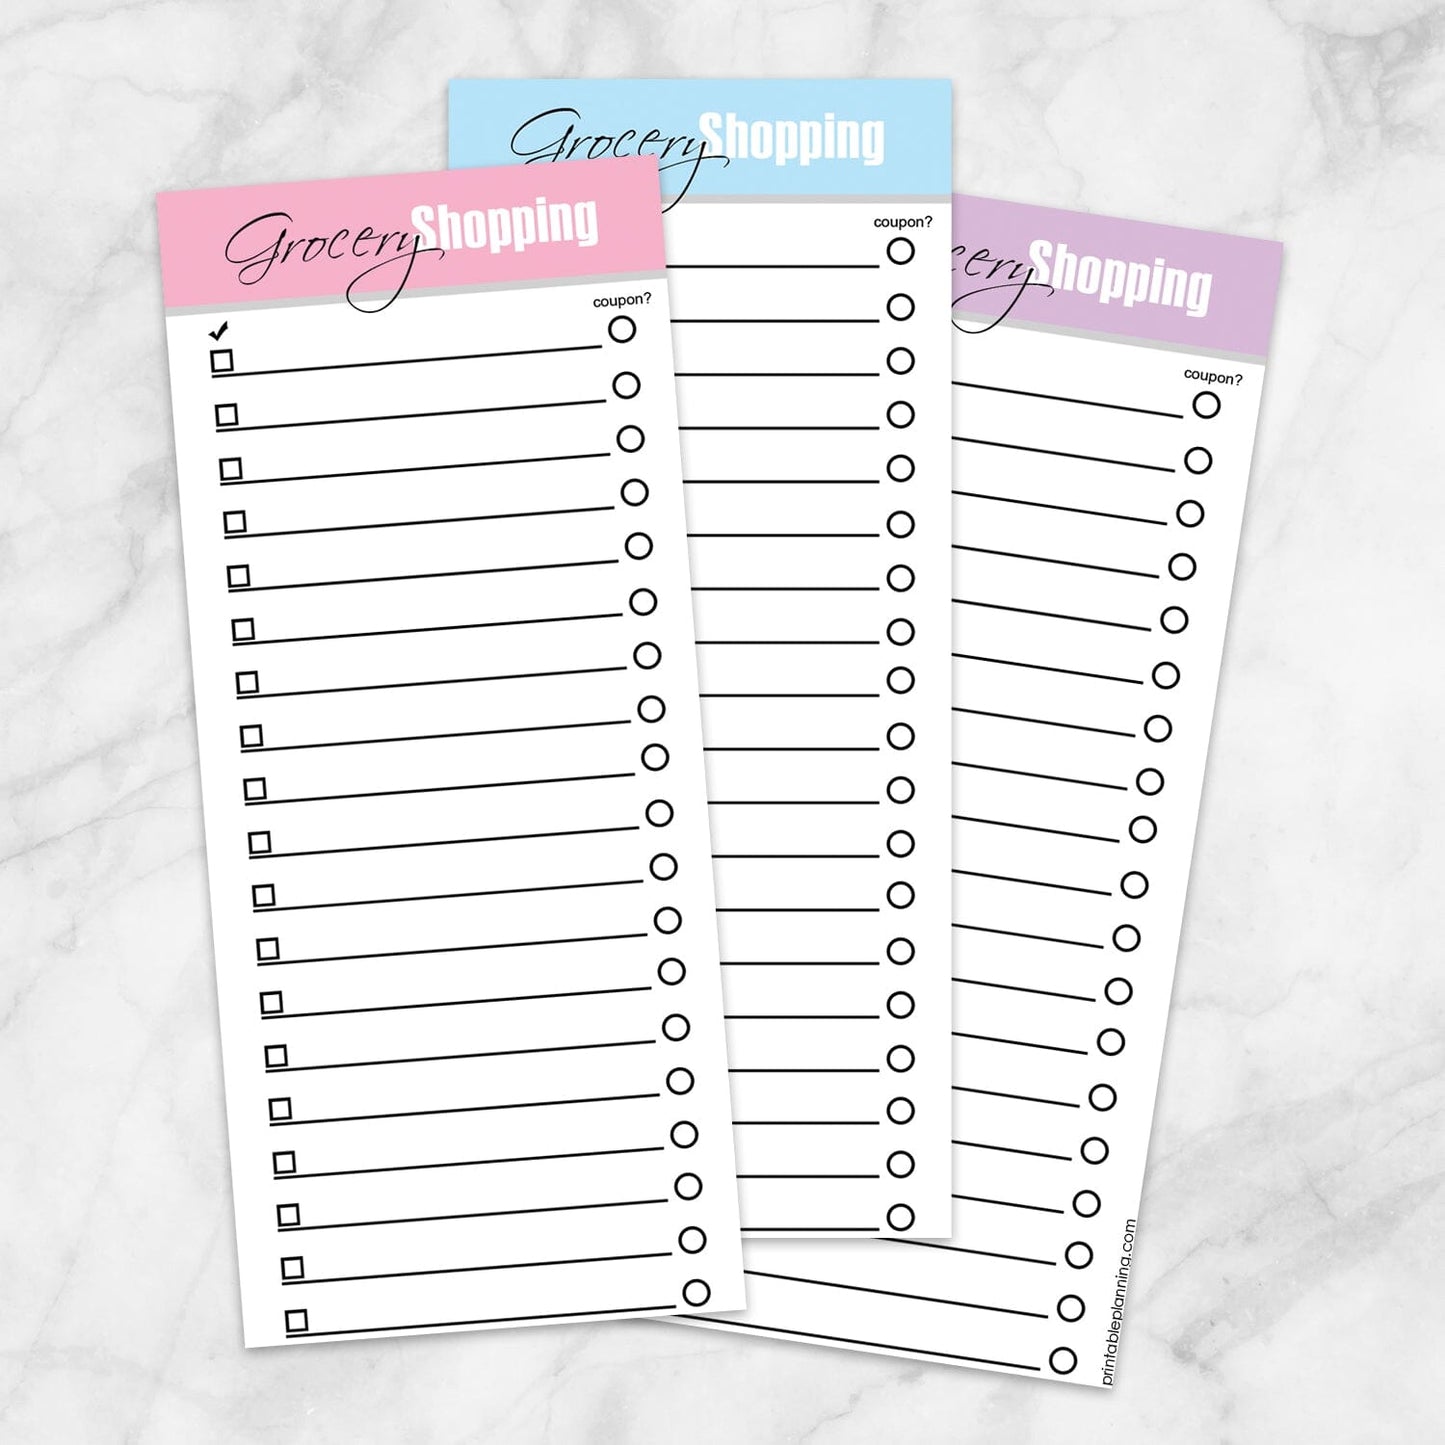 Printable Pink Blue and Purple Grocery Lists - 3 Lists Per Page at Printable Planning. Example of all 3 lists.